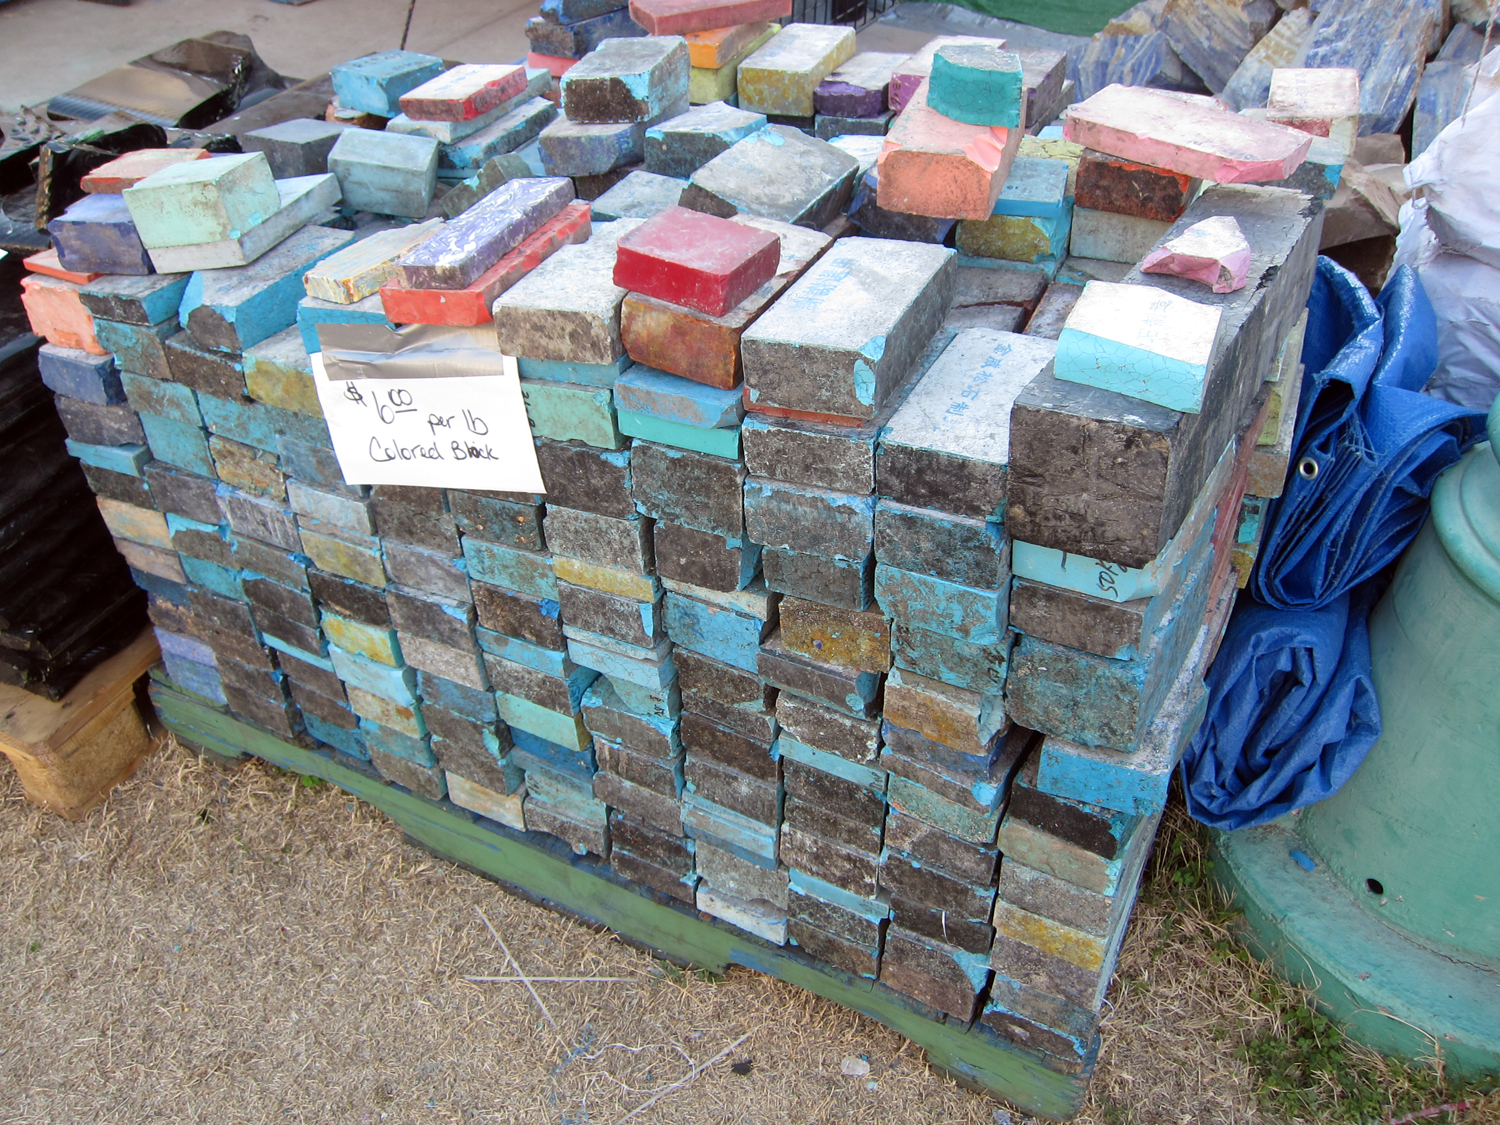  ​A pile of colorful bricks. Can you imagine a "brownstone" in Brooklyn constructed out of these? Would be rather funky! 